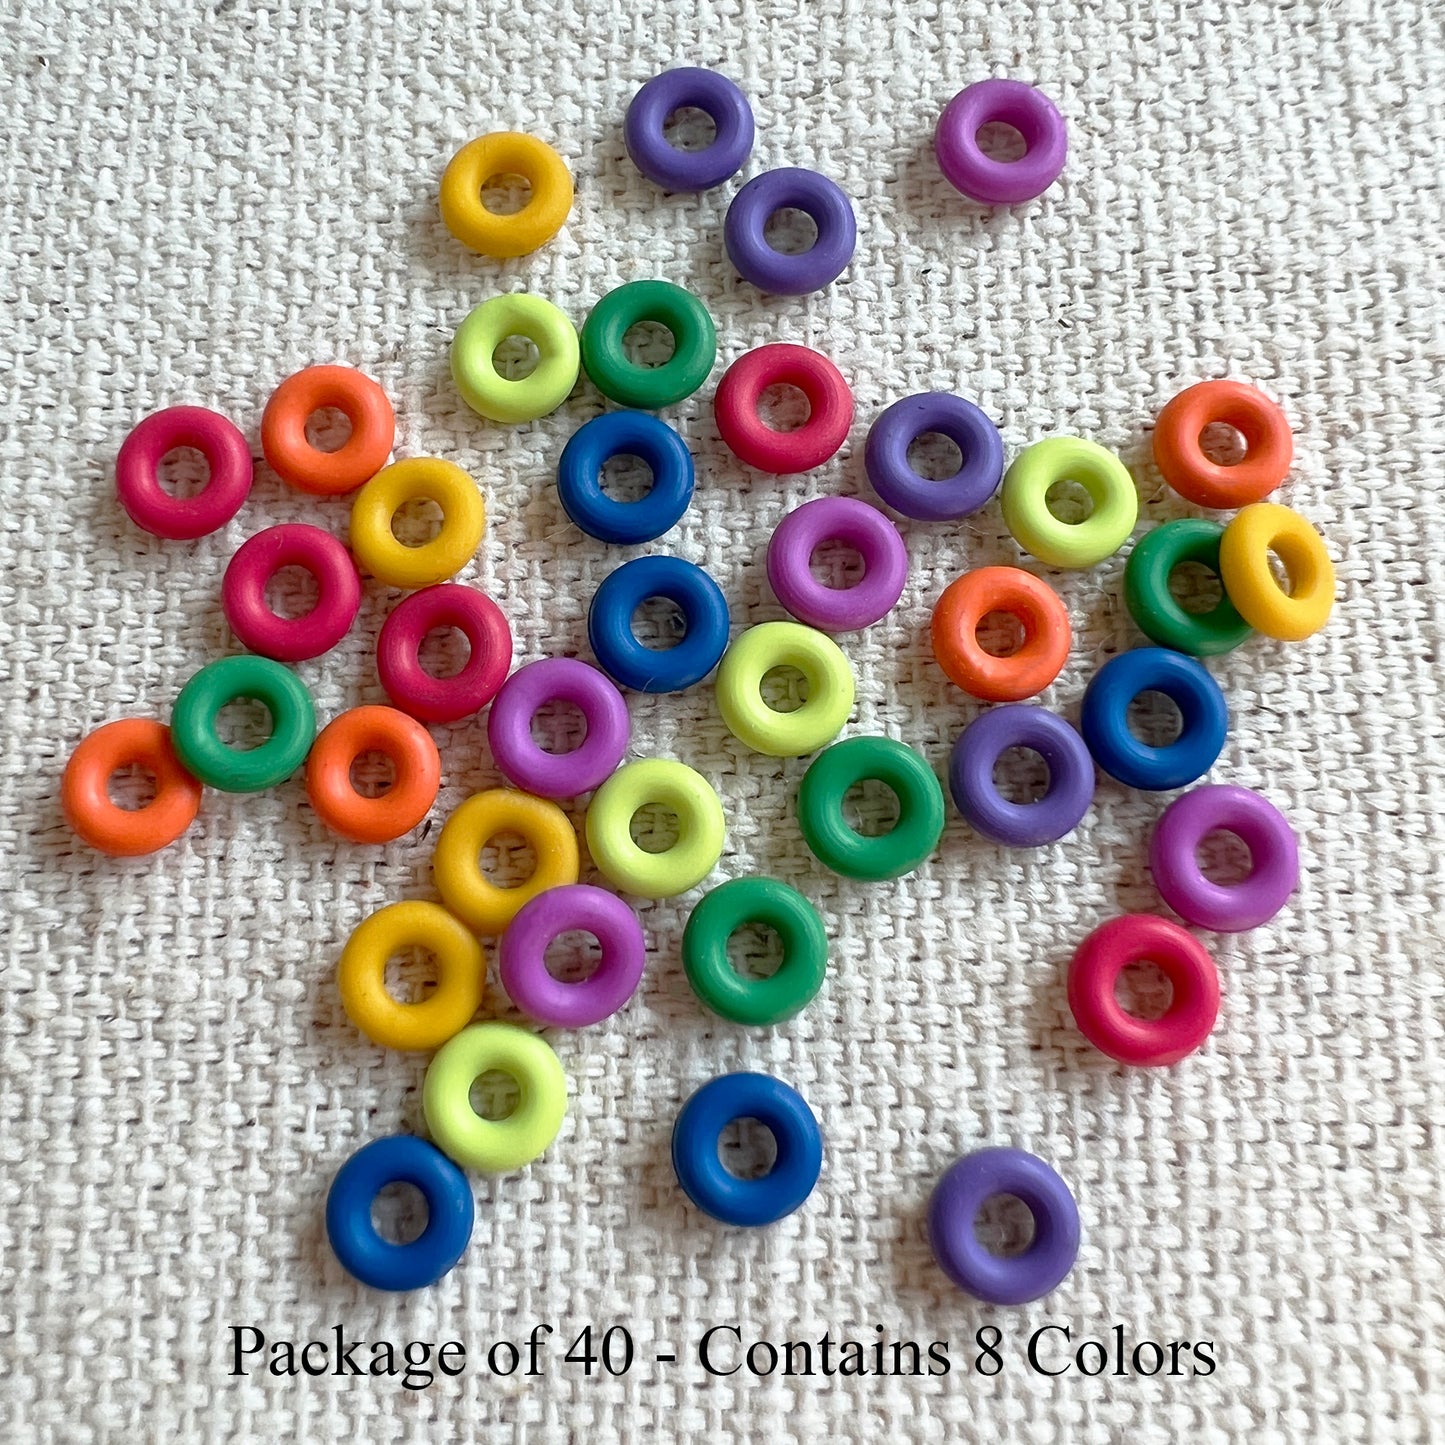 5mm O-Rings Hand Picked Rainbow Mix - Package of 40